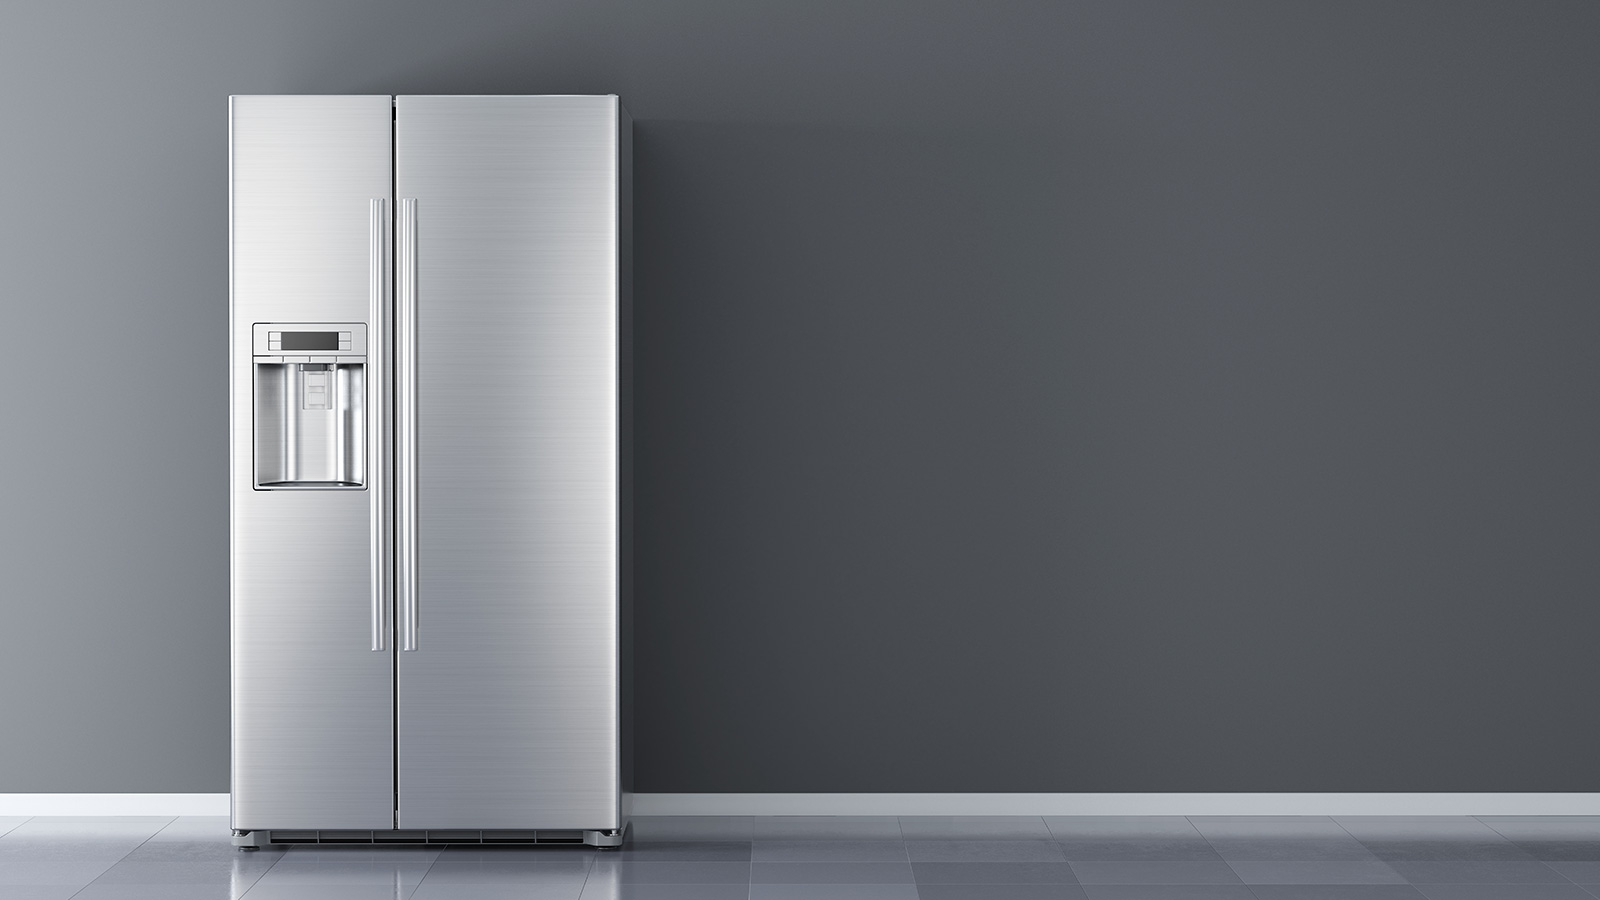 Freestanding or Integrated Fridge - Which is Better?